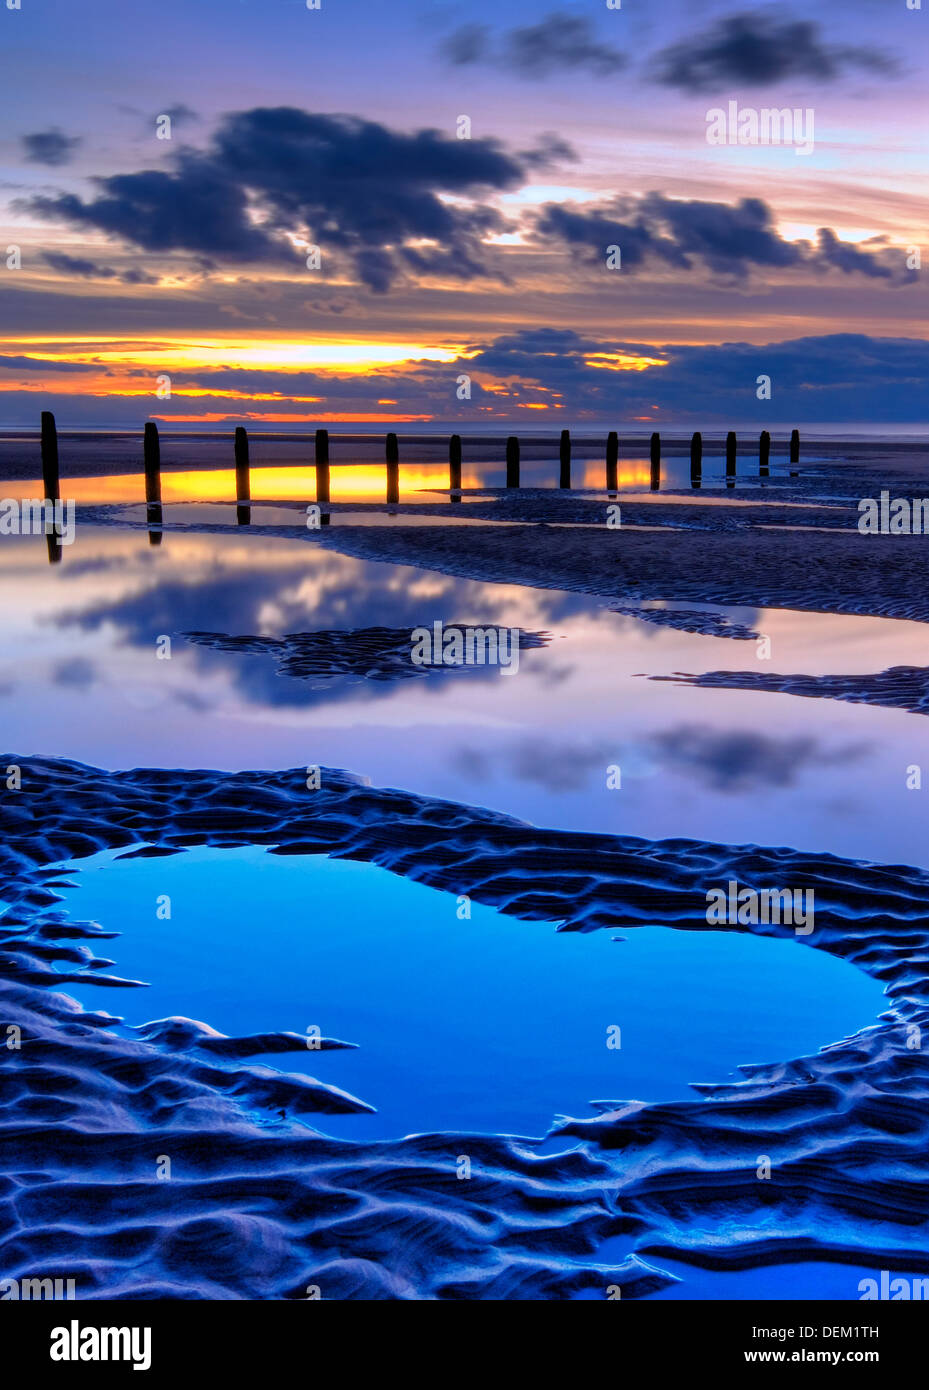 beach and wooden groyne at sunset, with large pools of water and cloud reflections, blackpool, lancashire, england, uk,europe Stock Photo